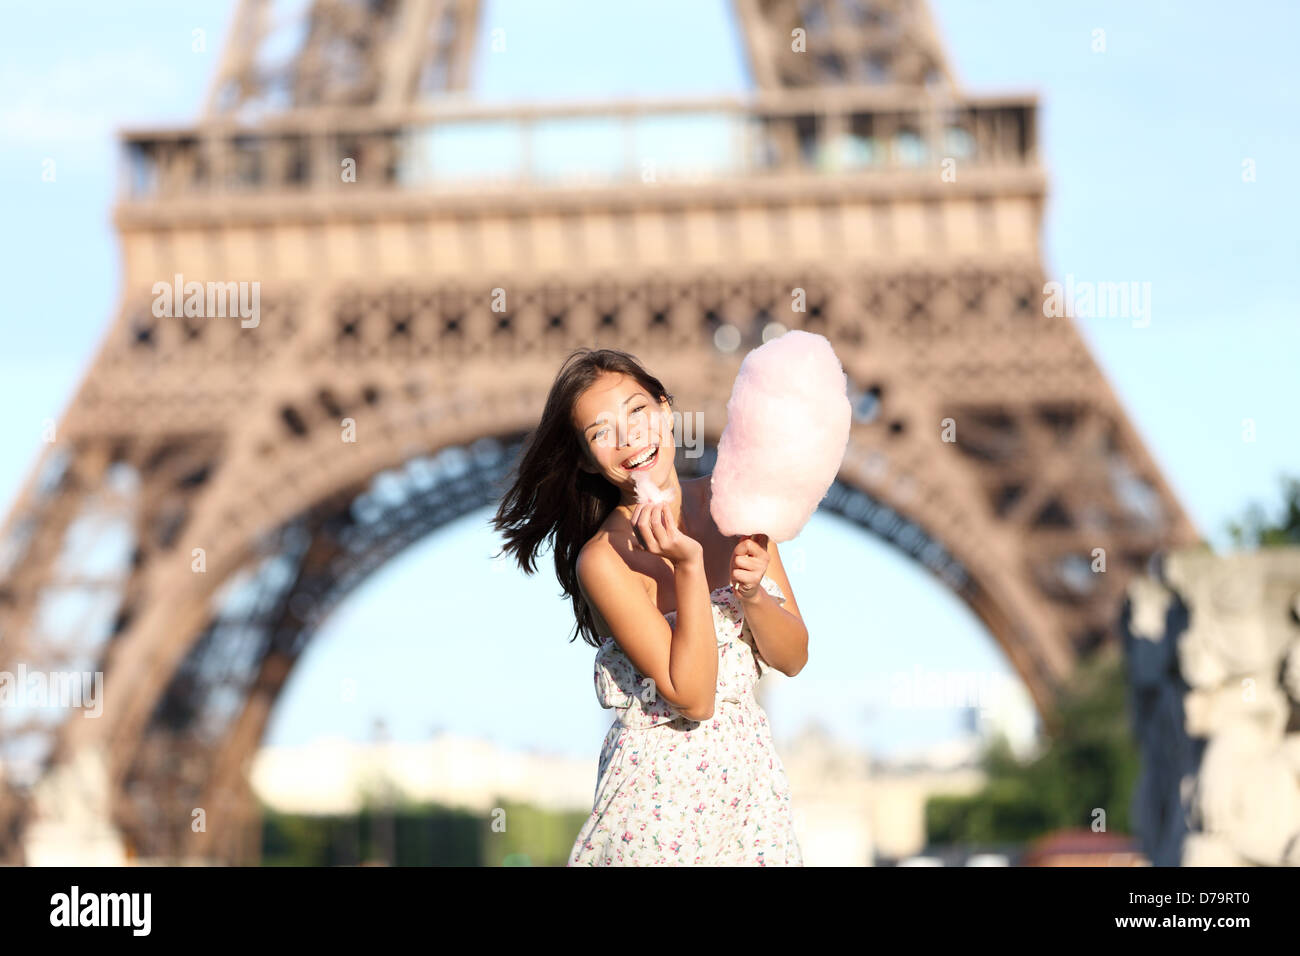 Paris Eiffel Tower woman smiling happy and cheerful eating cotton candy in front of Eiffel Tower in Paris, France. Cute Asian / Caucasian girl. Stock Photo